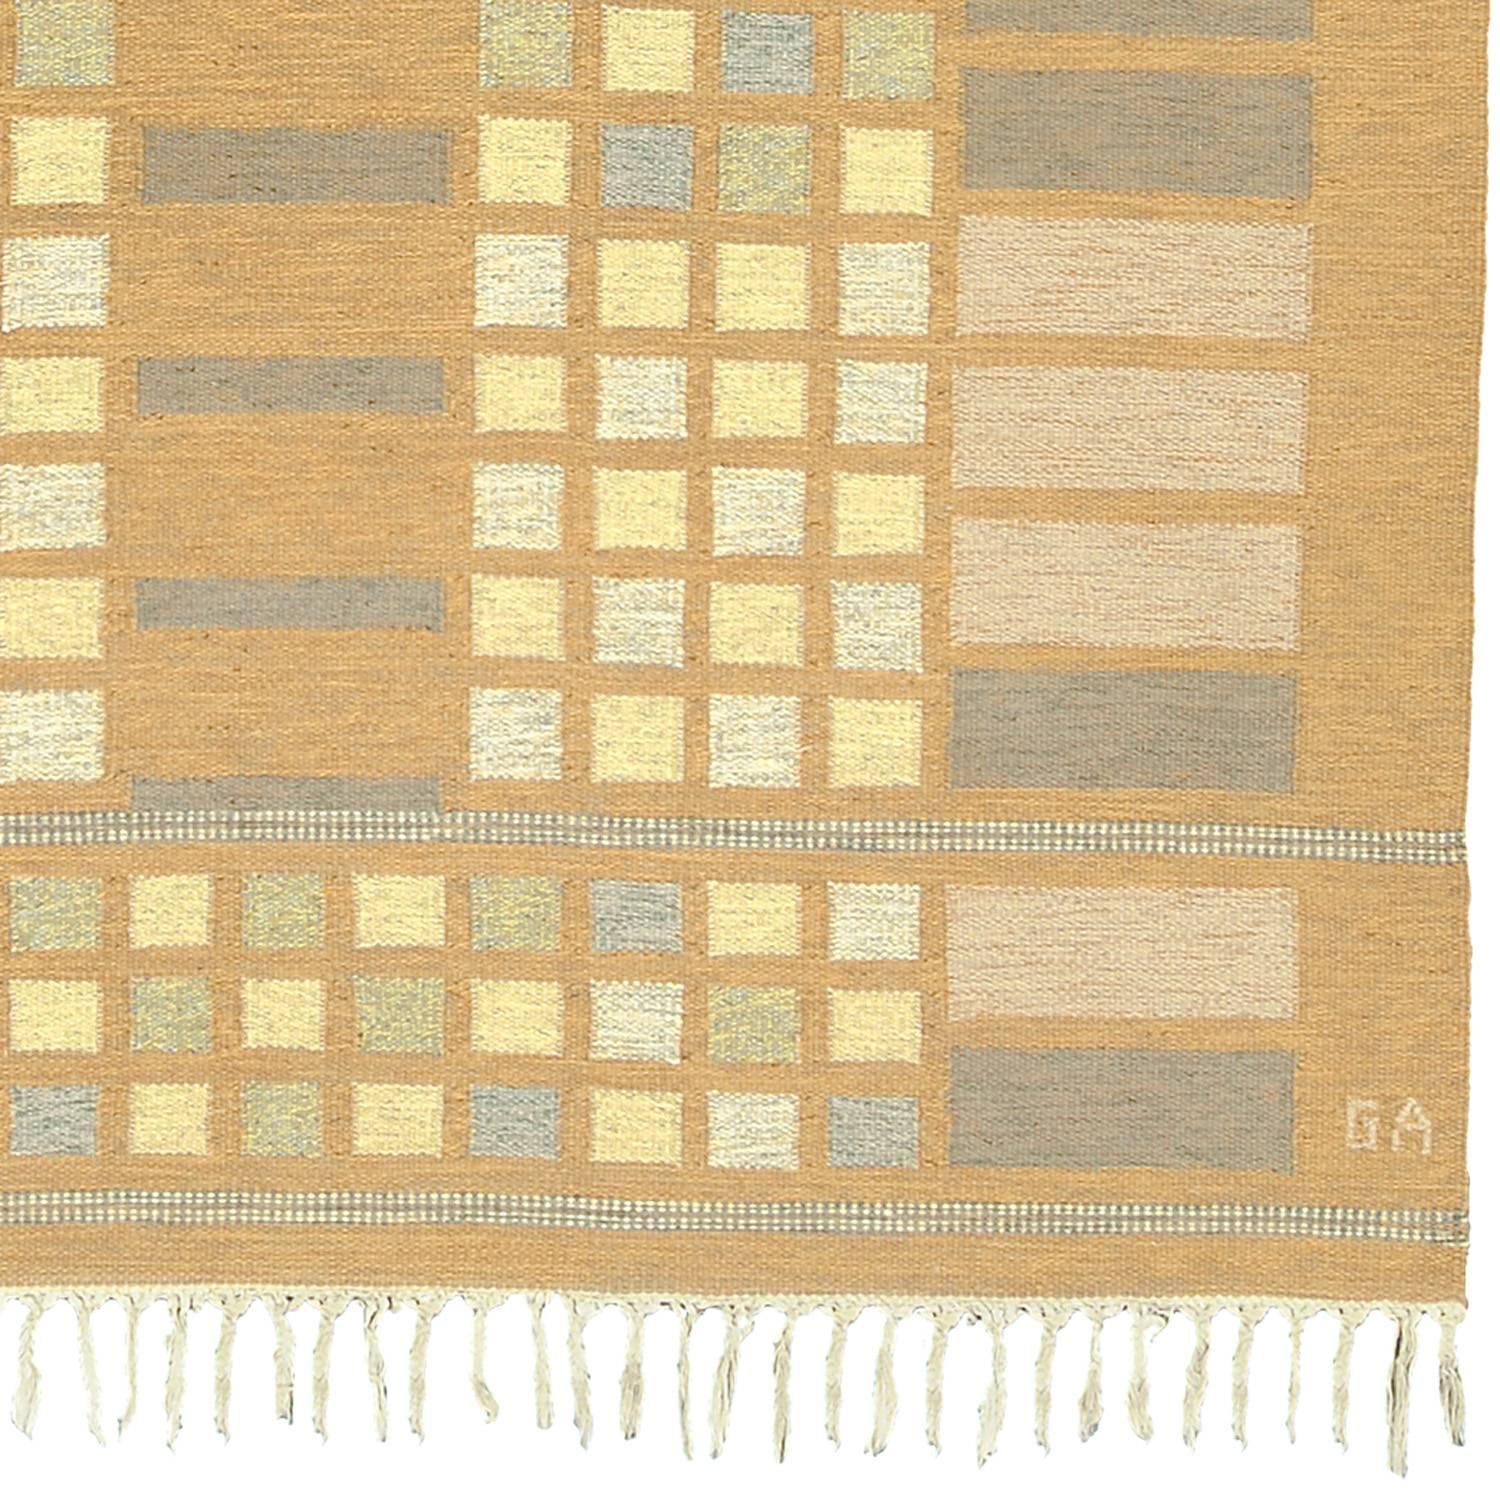 Hand-Woven Mid-20th Century Swedish Flat-Weave Carpet For Sale